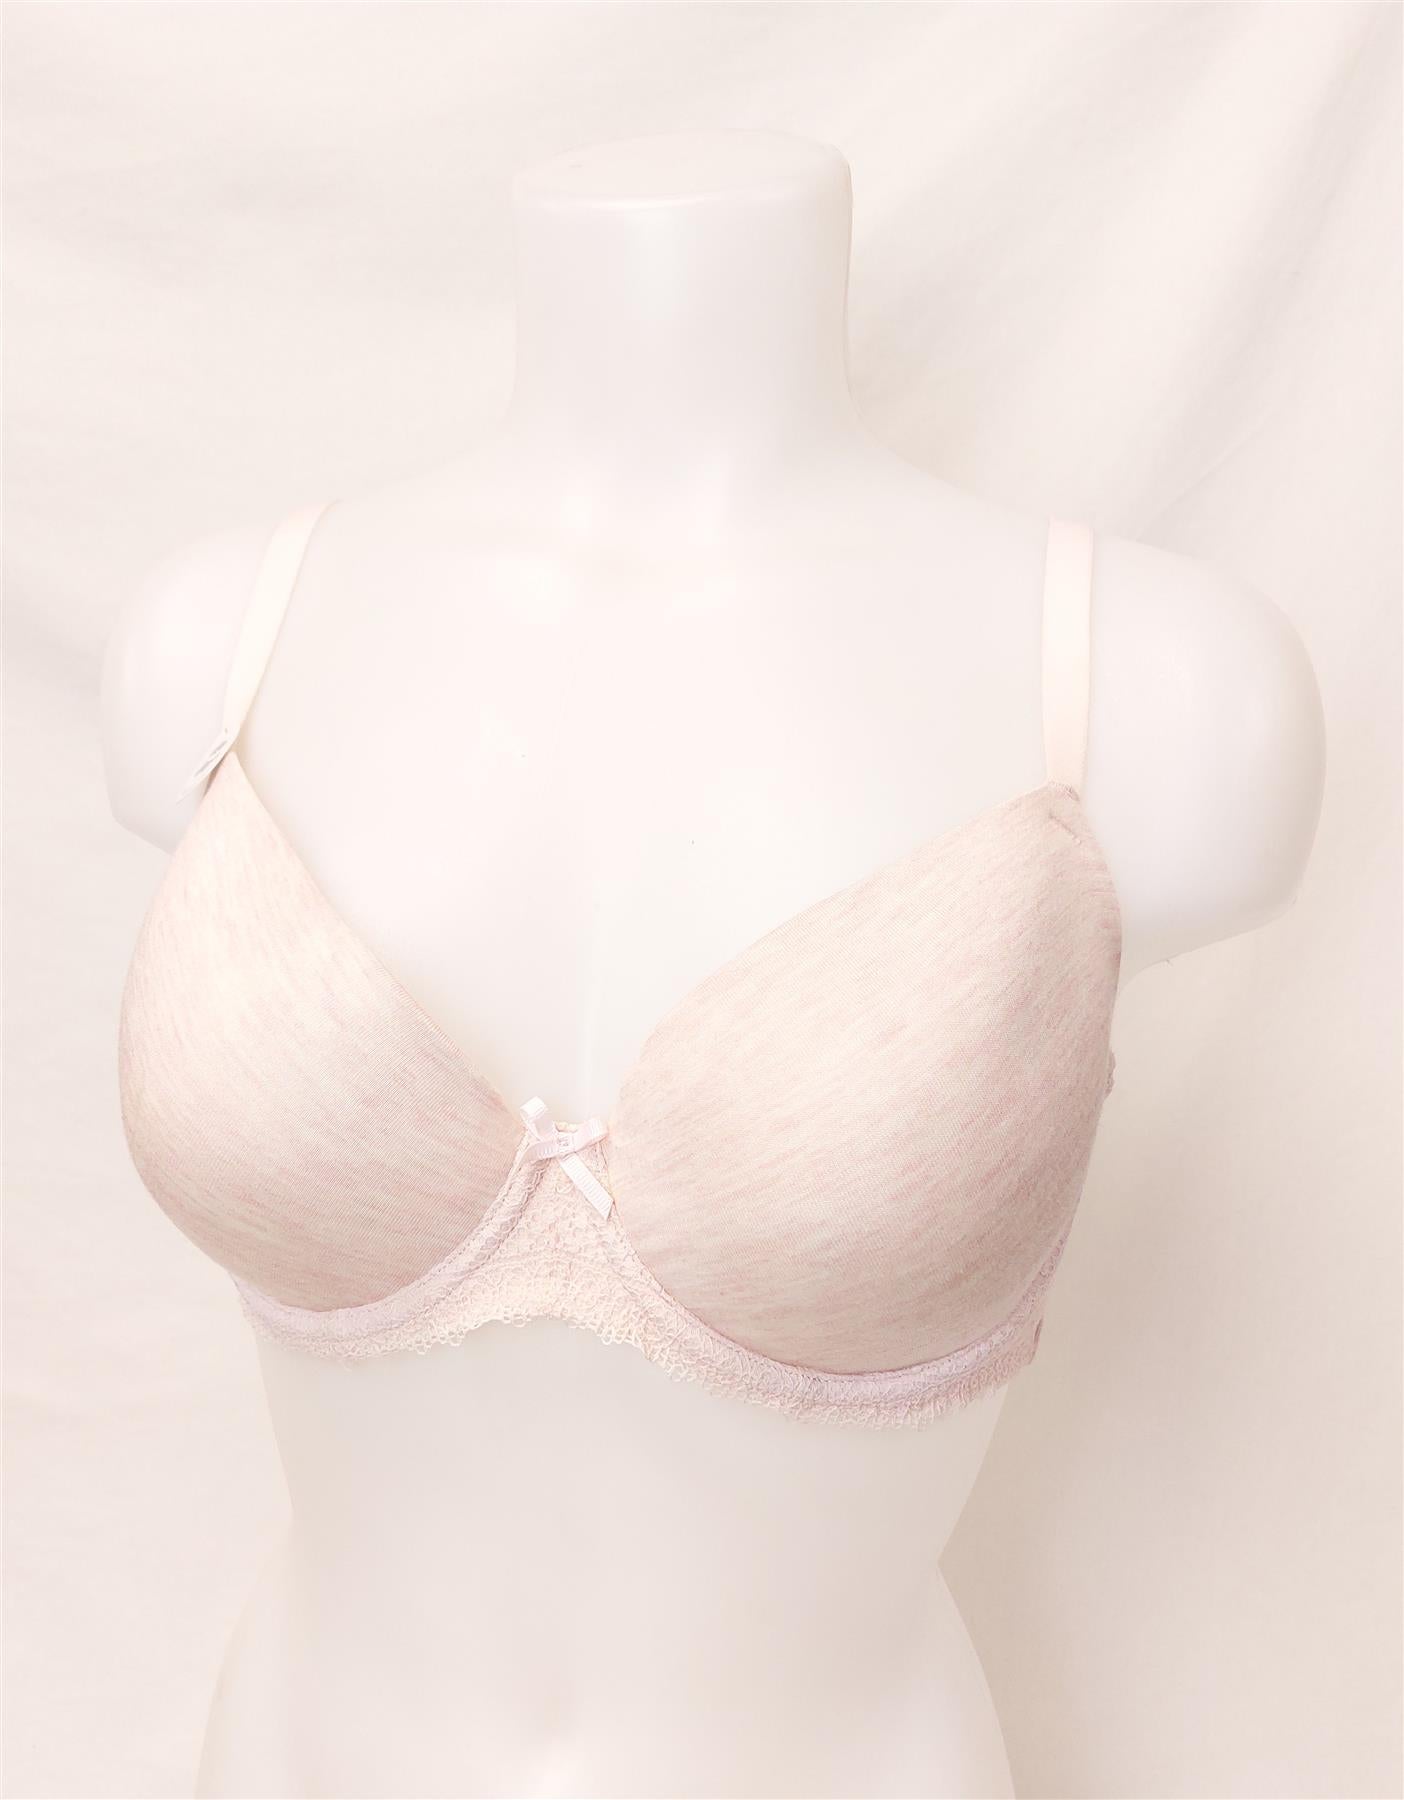 F&F Soft Touch Bra Underwired Padded Lace Trim Full Cup Supersoft Shop Soiled